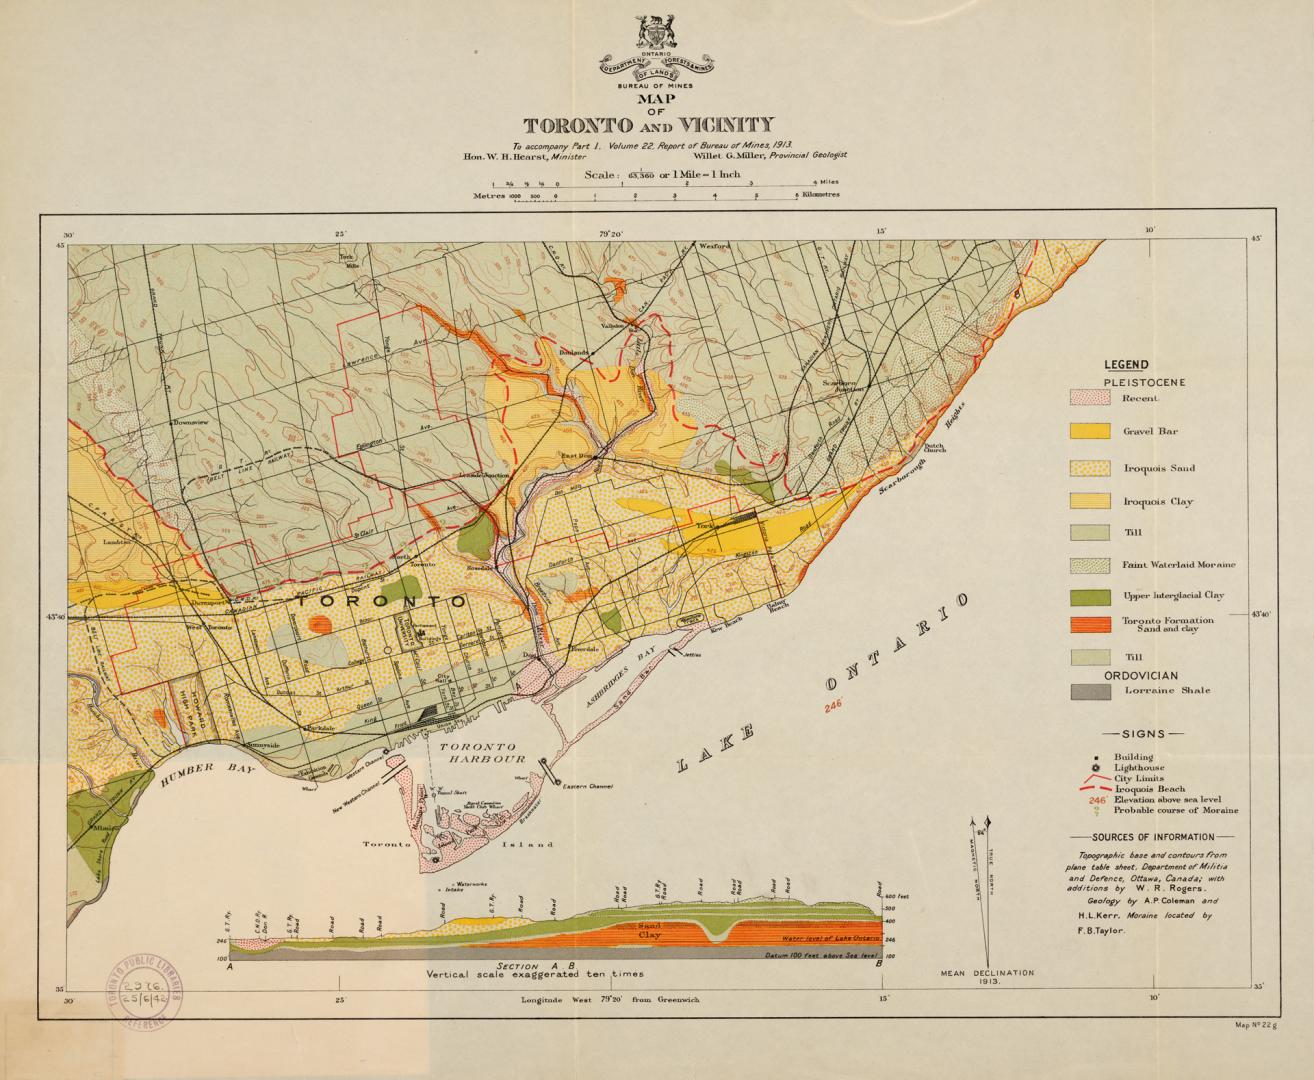 Map of Toronto and vicinity